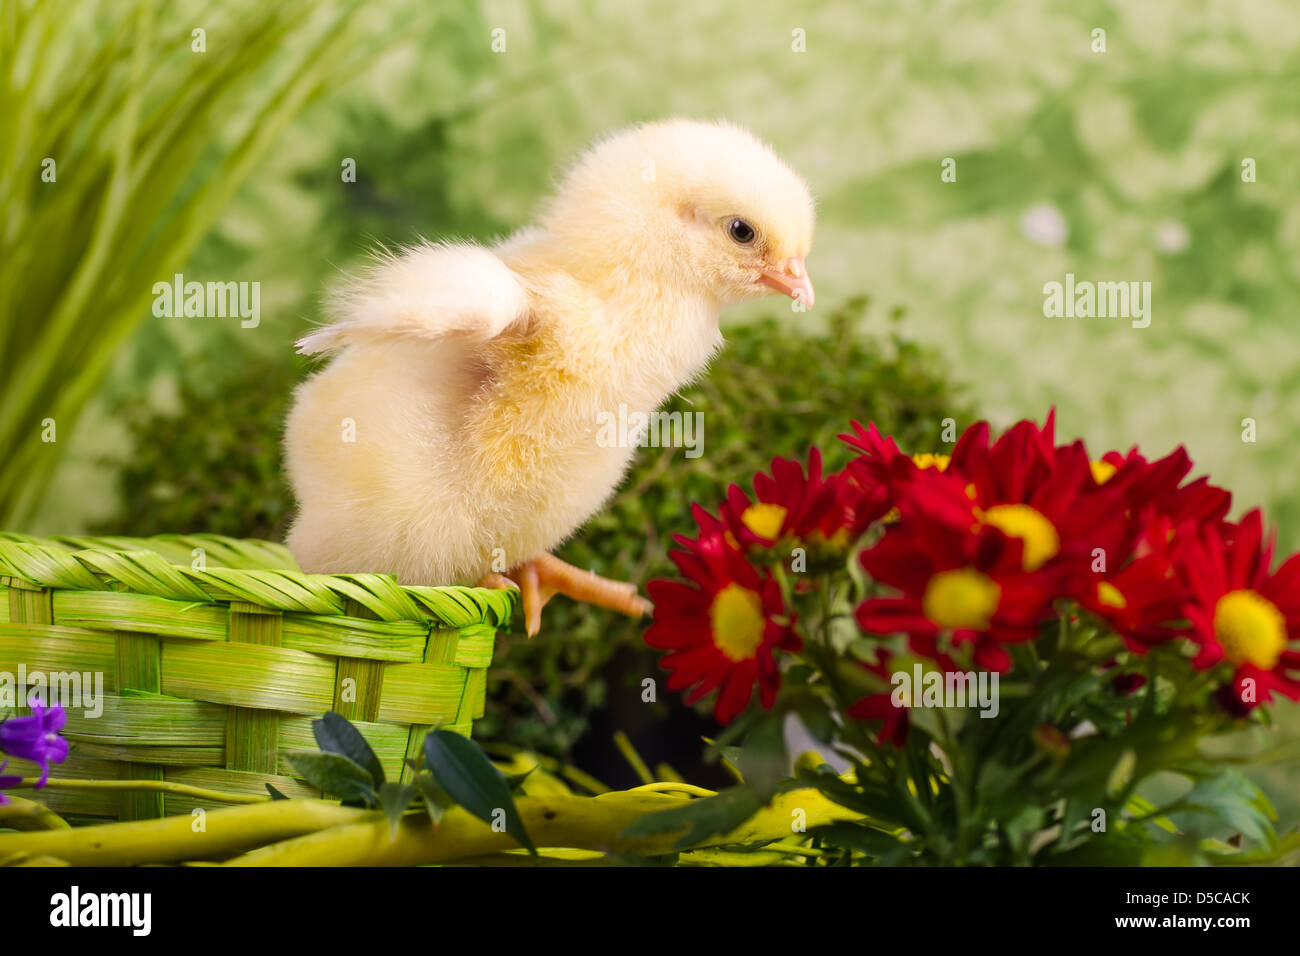 Beautiful little chicken with flowers Stock Photo